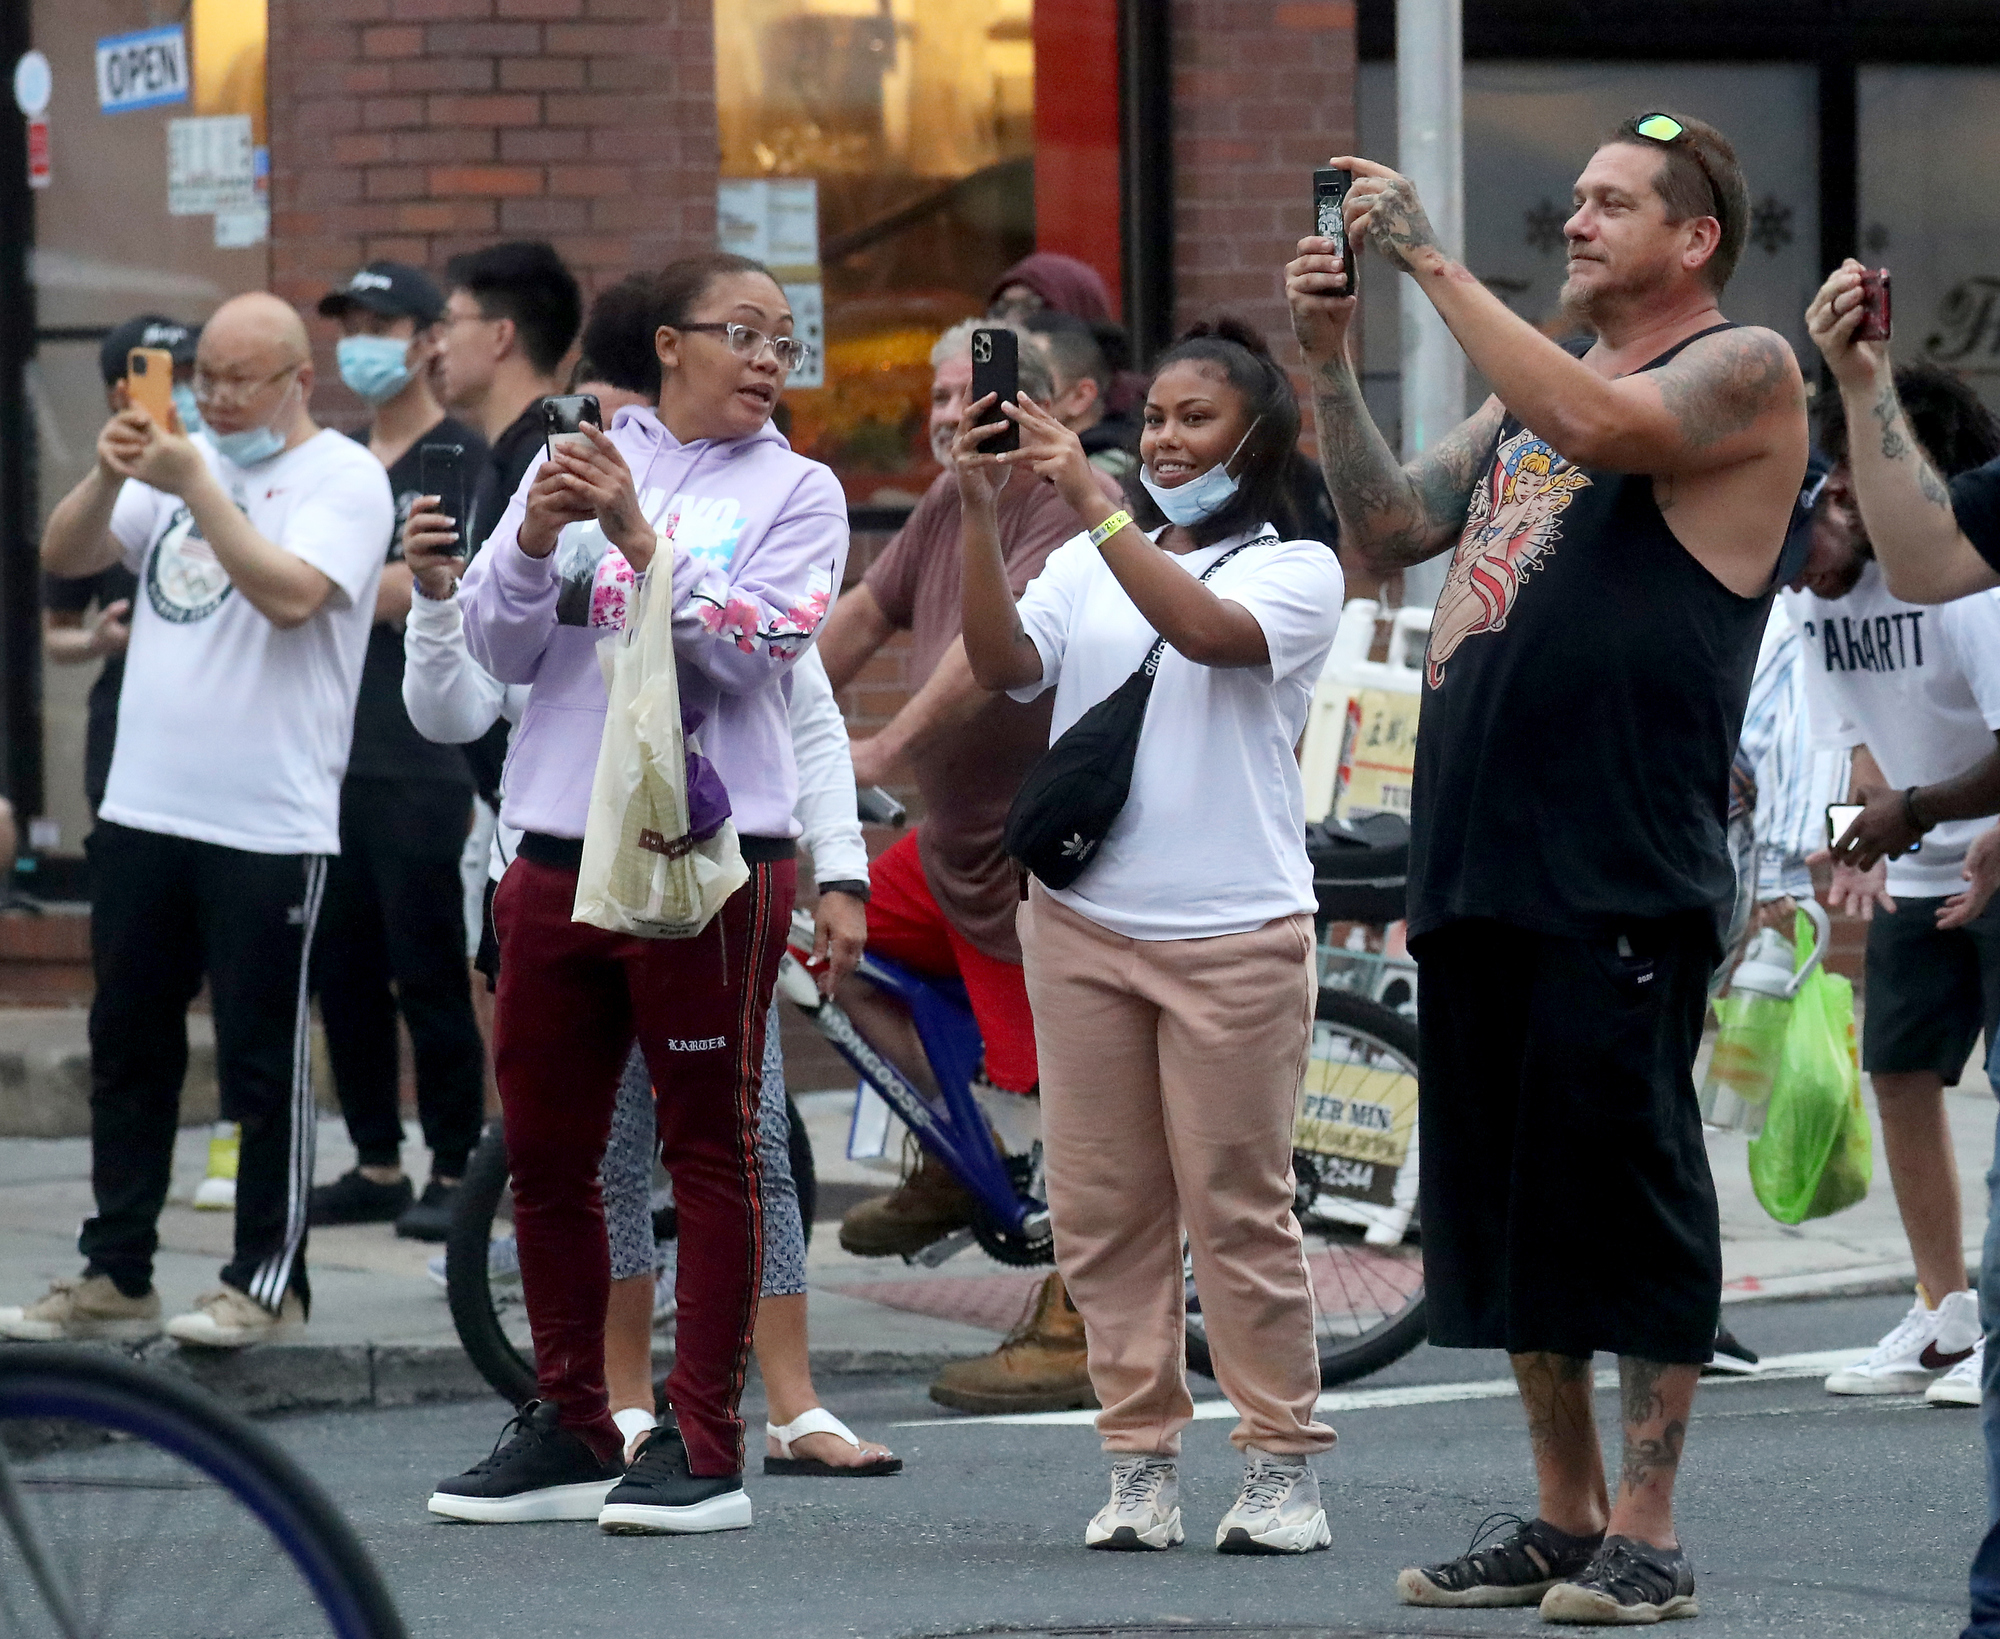 People watch and record as participants in the Philly Naked Bike Ride ride along Arch Street in Philadelphia, Saturday, Aug. 28, 2021.